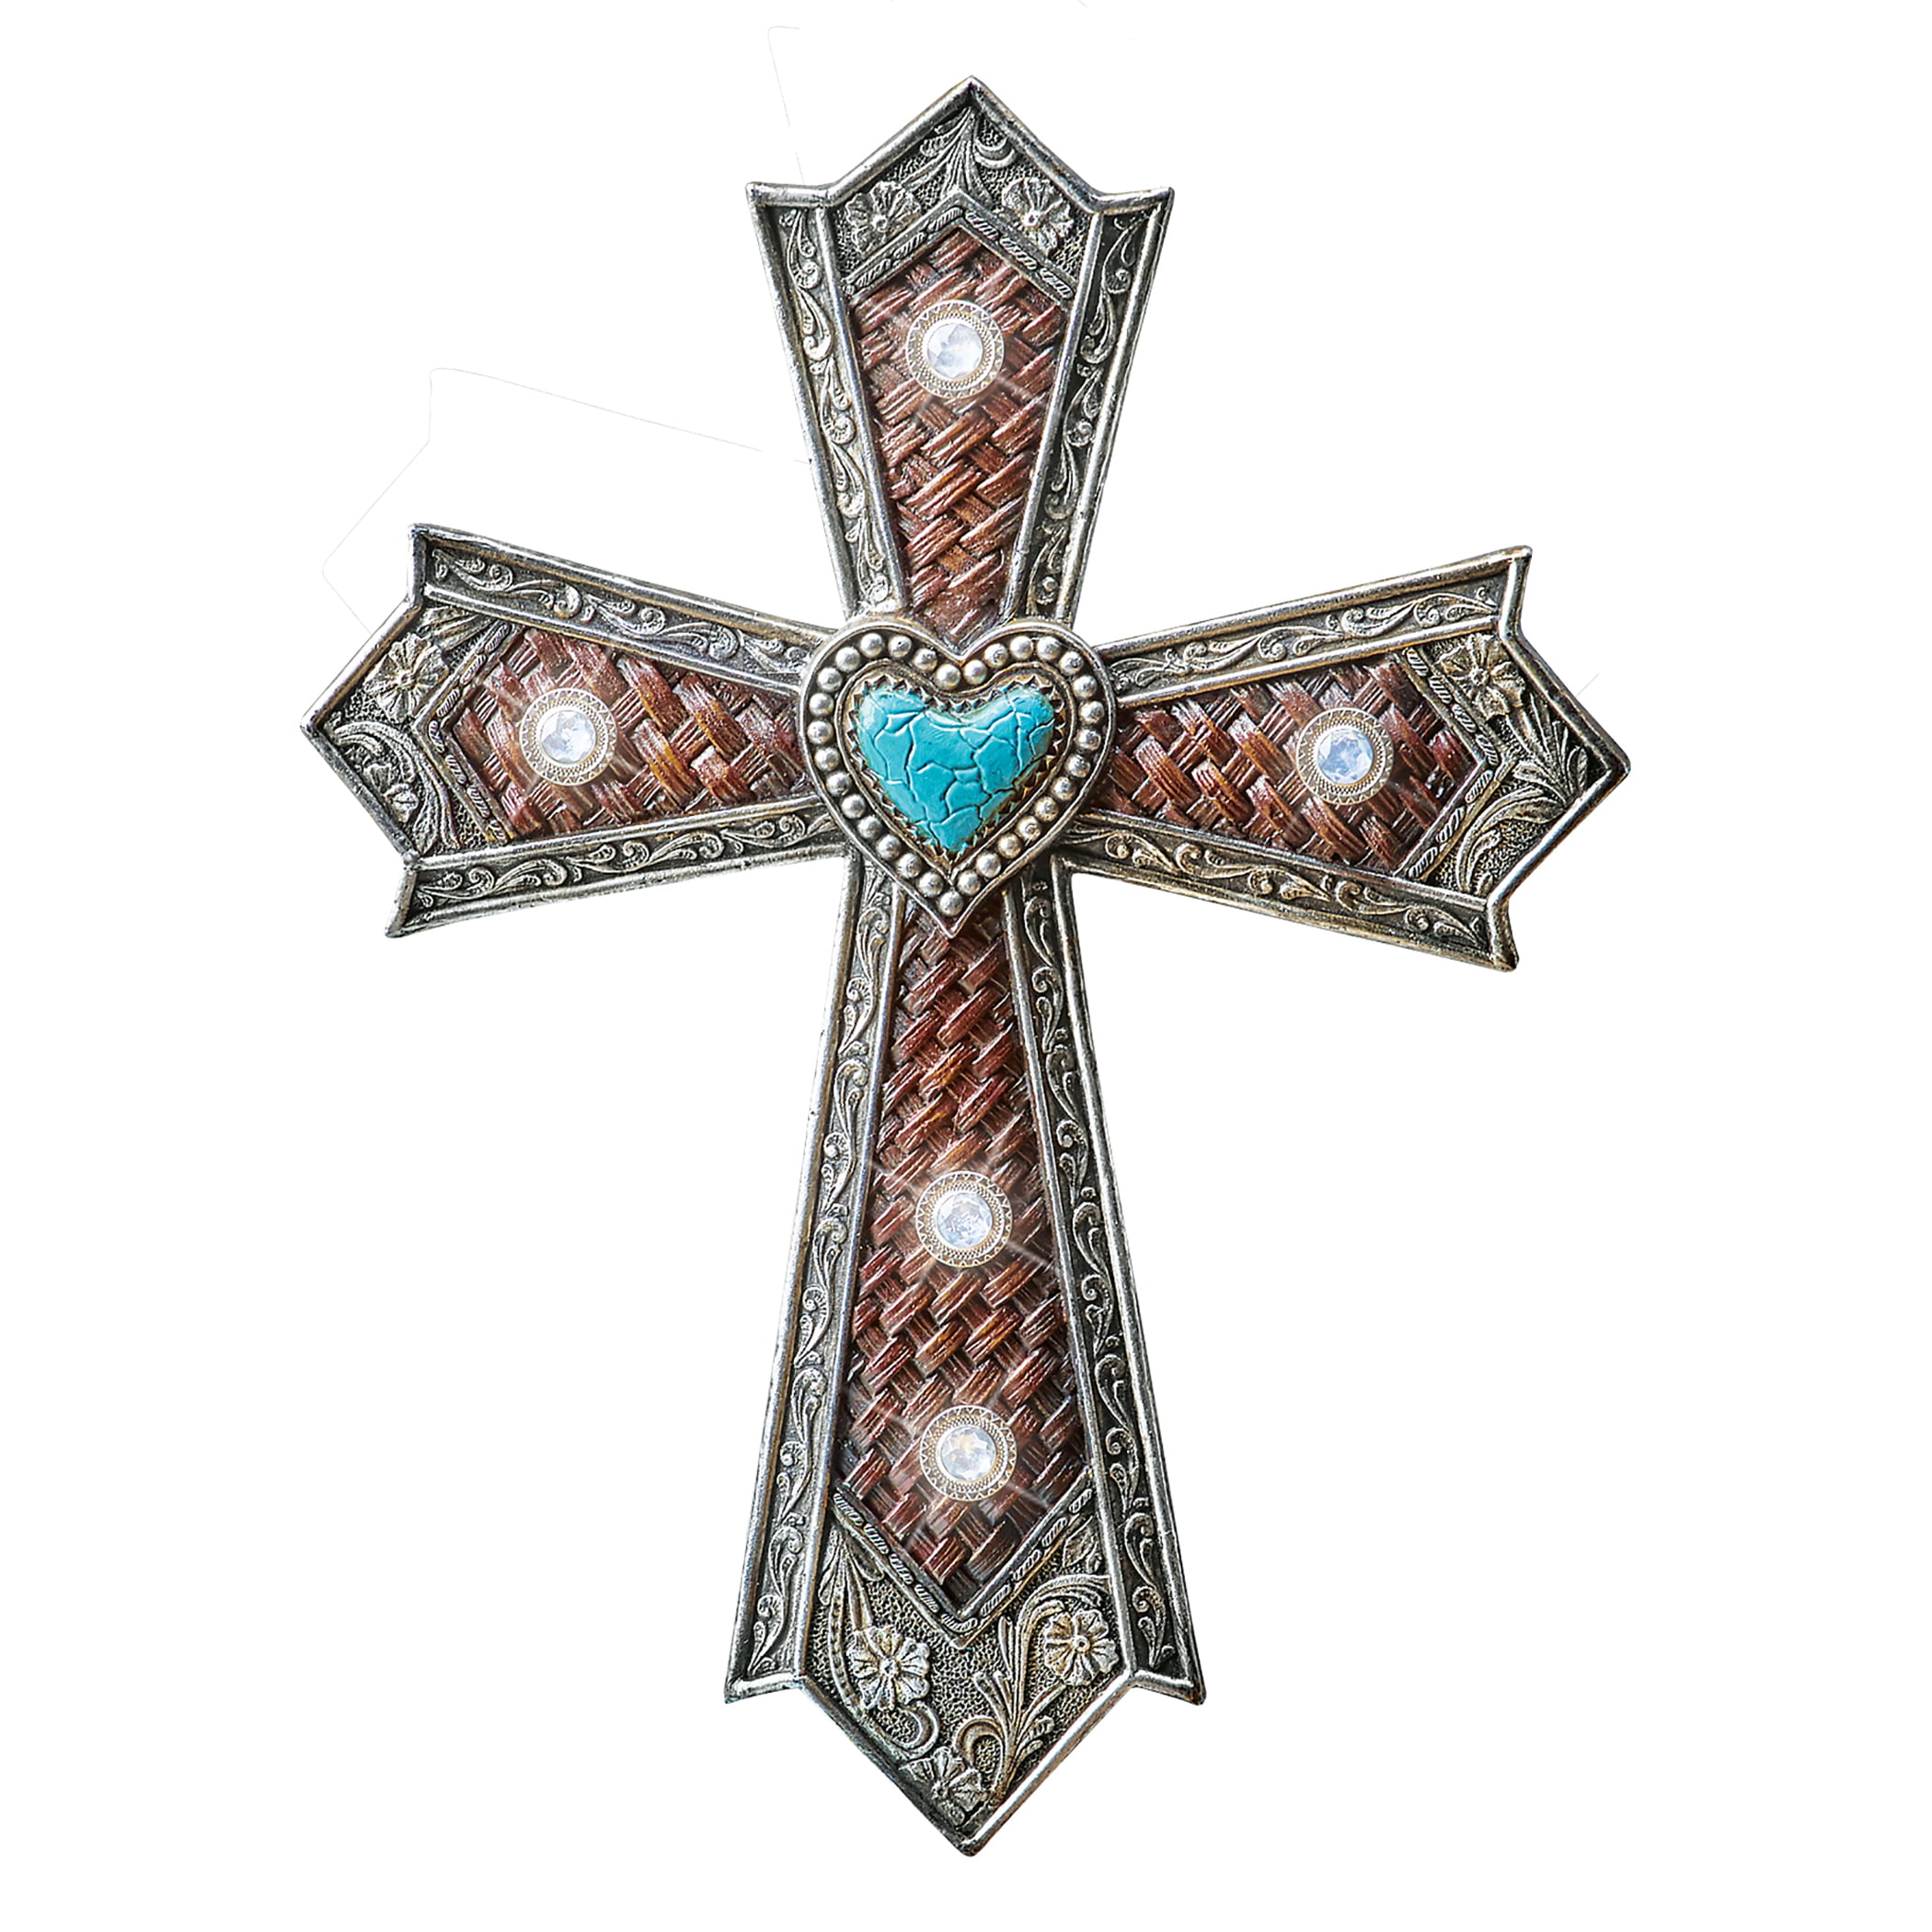 Old World Western Turquoise Cross Ornament Antique Finish Hanging Deco Set of 4 